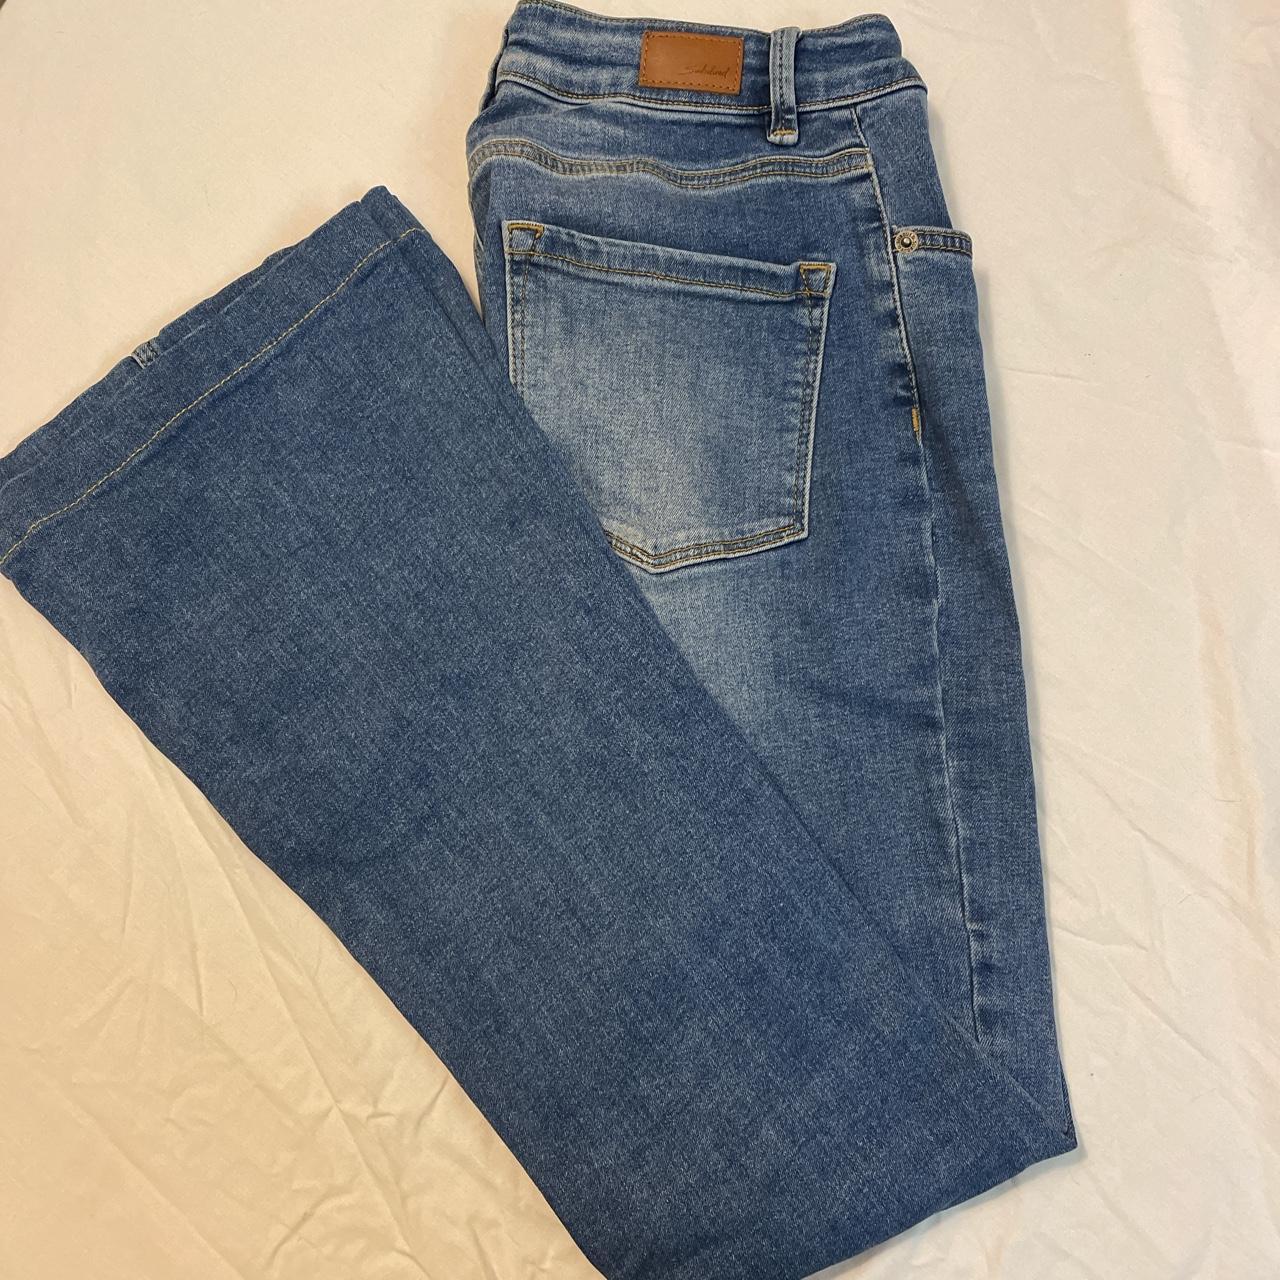 Subdued Low-rise Flare Jeans Worn a few times but... - Depop